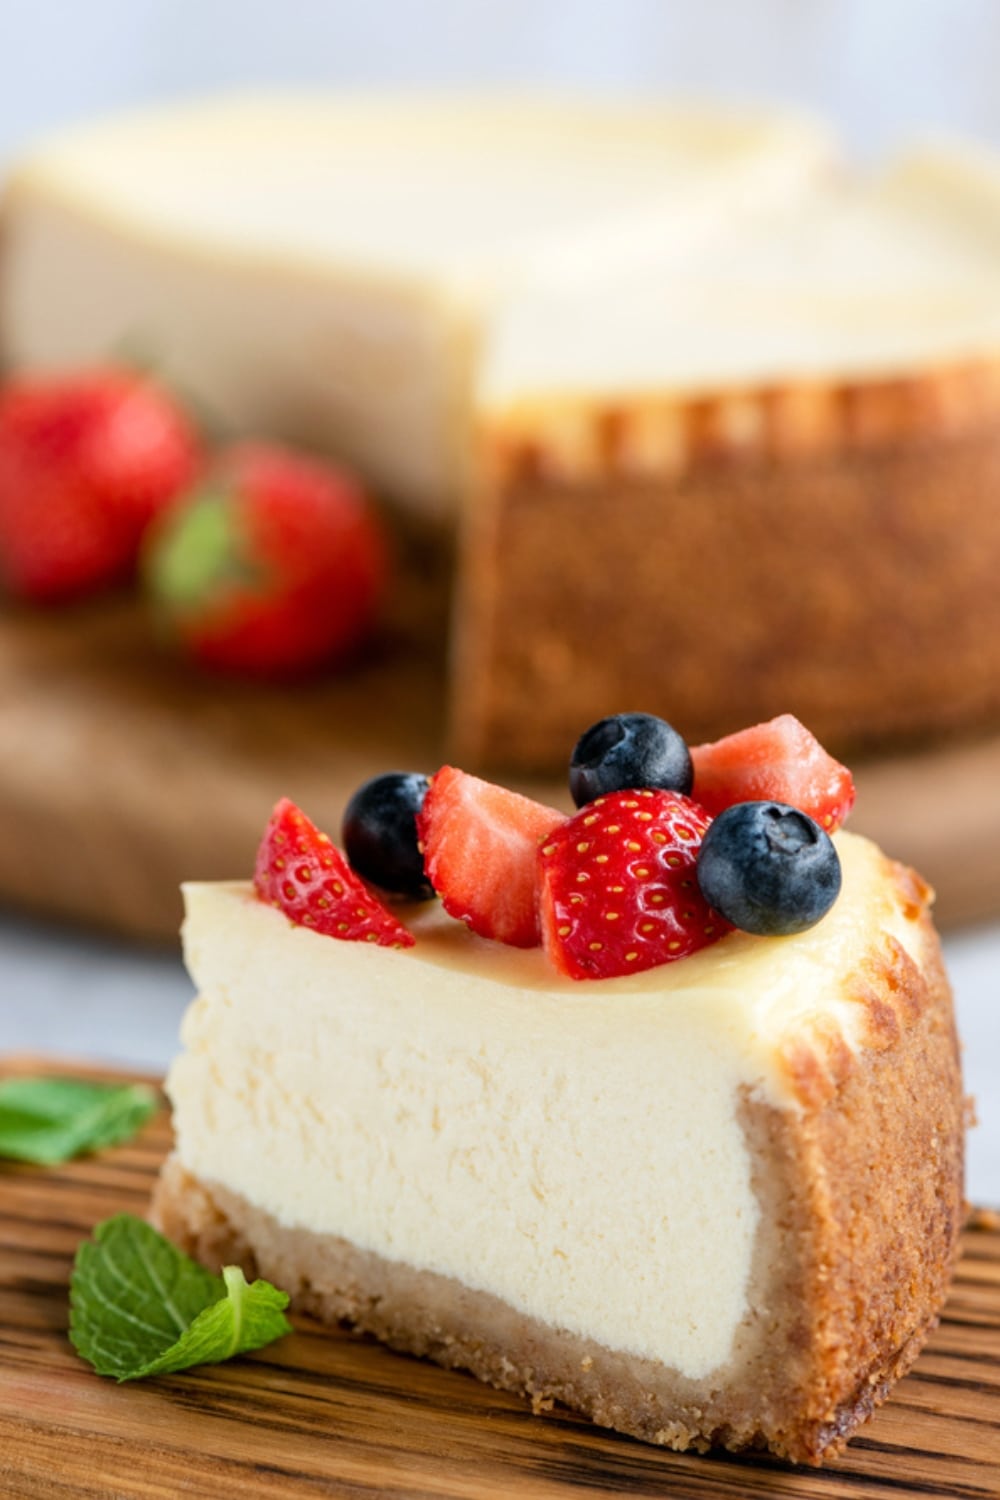 Creamy Thick Slice of New York Cheese Cake With Sliced Strawberries and Blueberries